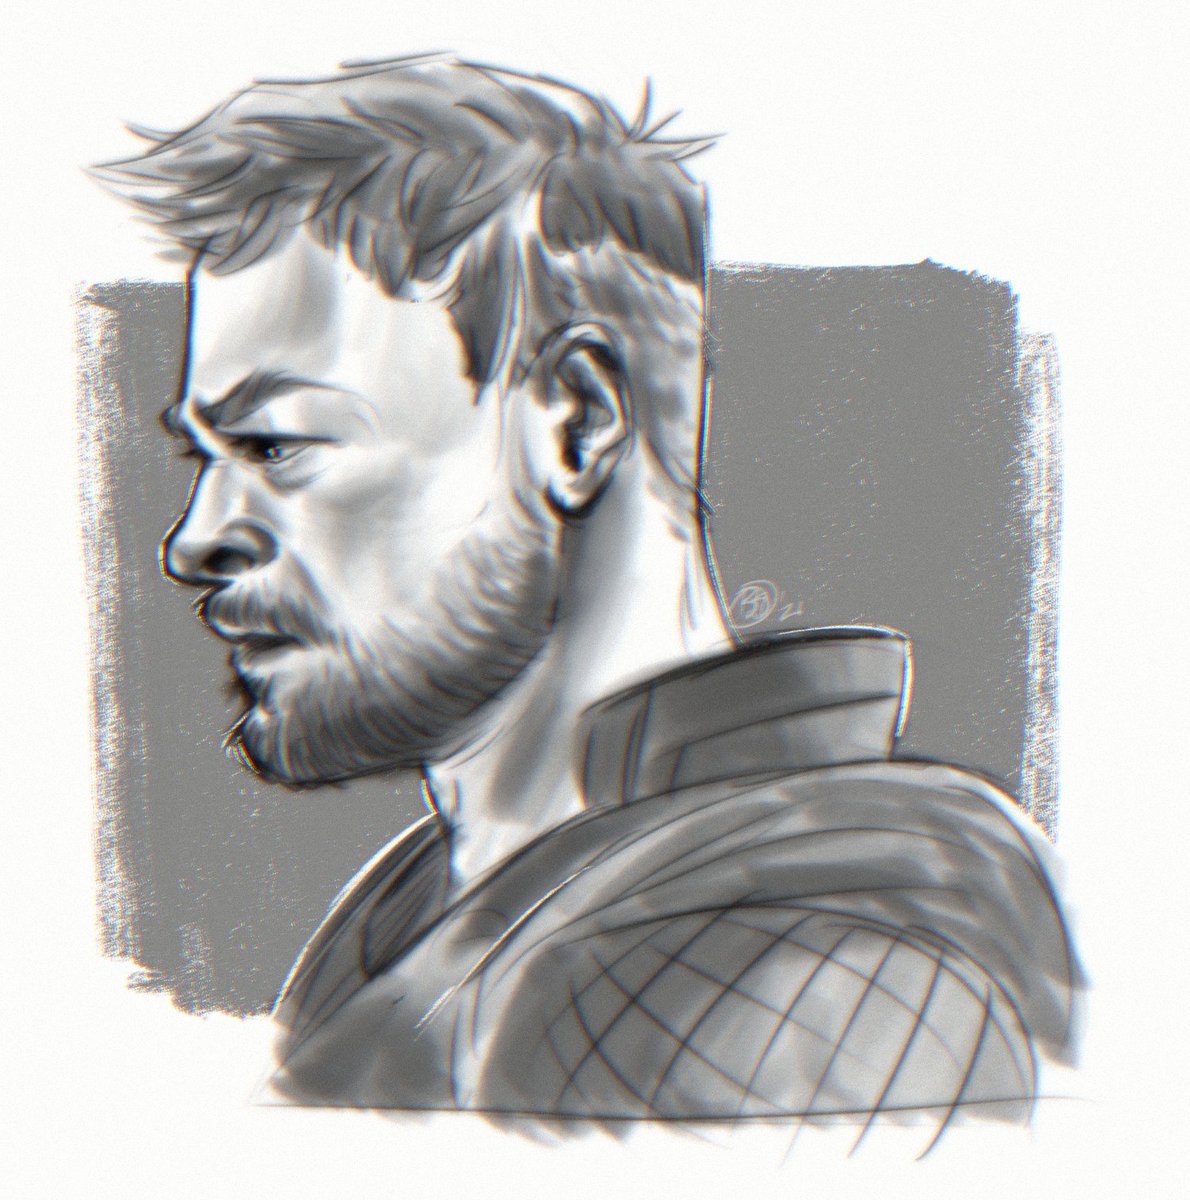 RT @thwipped: before bed doodle + gradient maps #Thor #ThorRagnarok https://t.co/rSnxuxHYWX